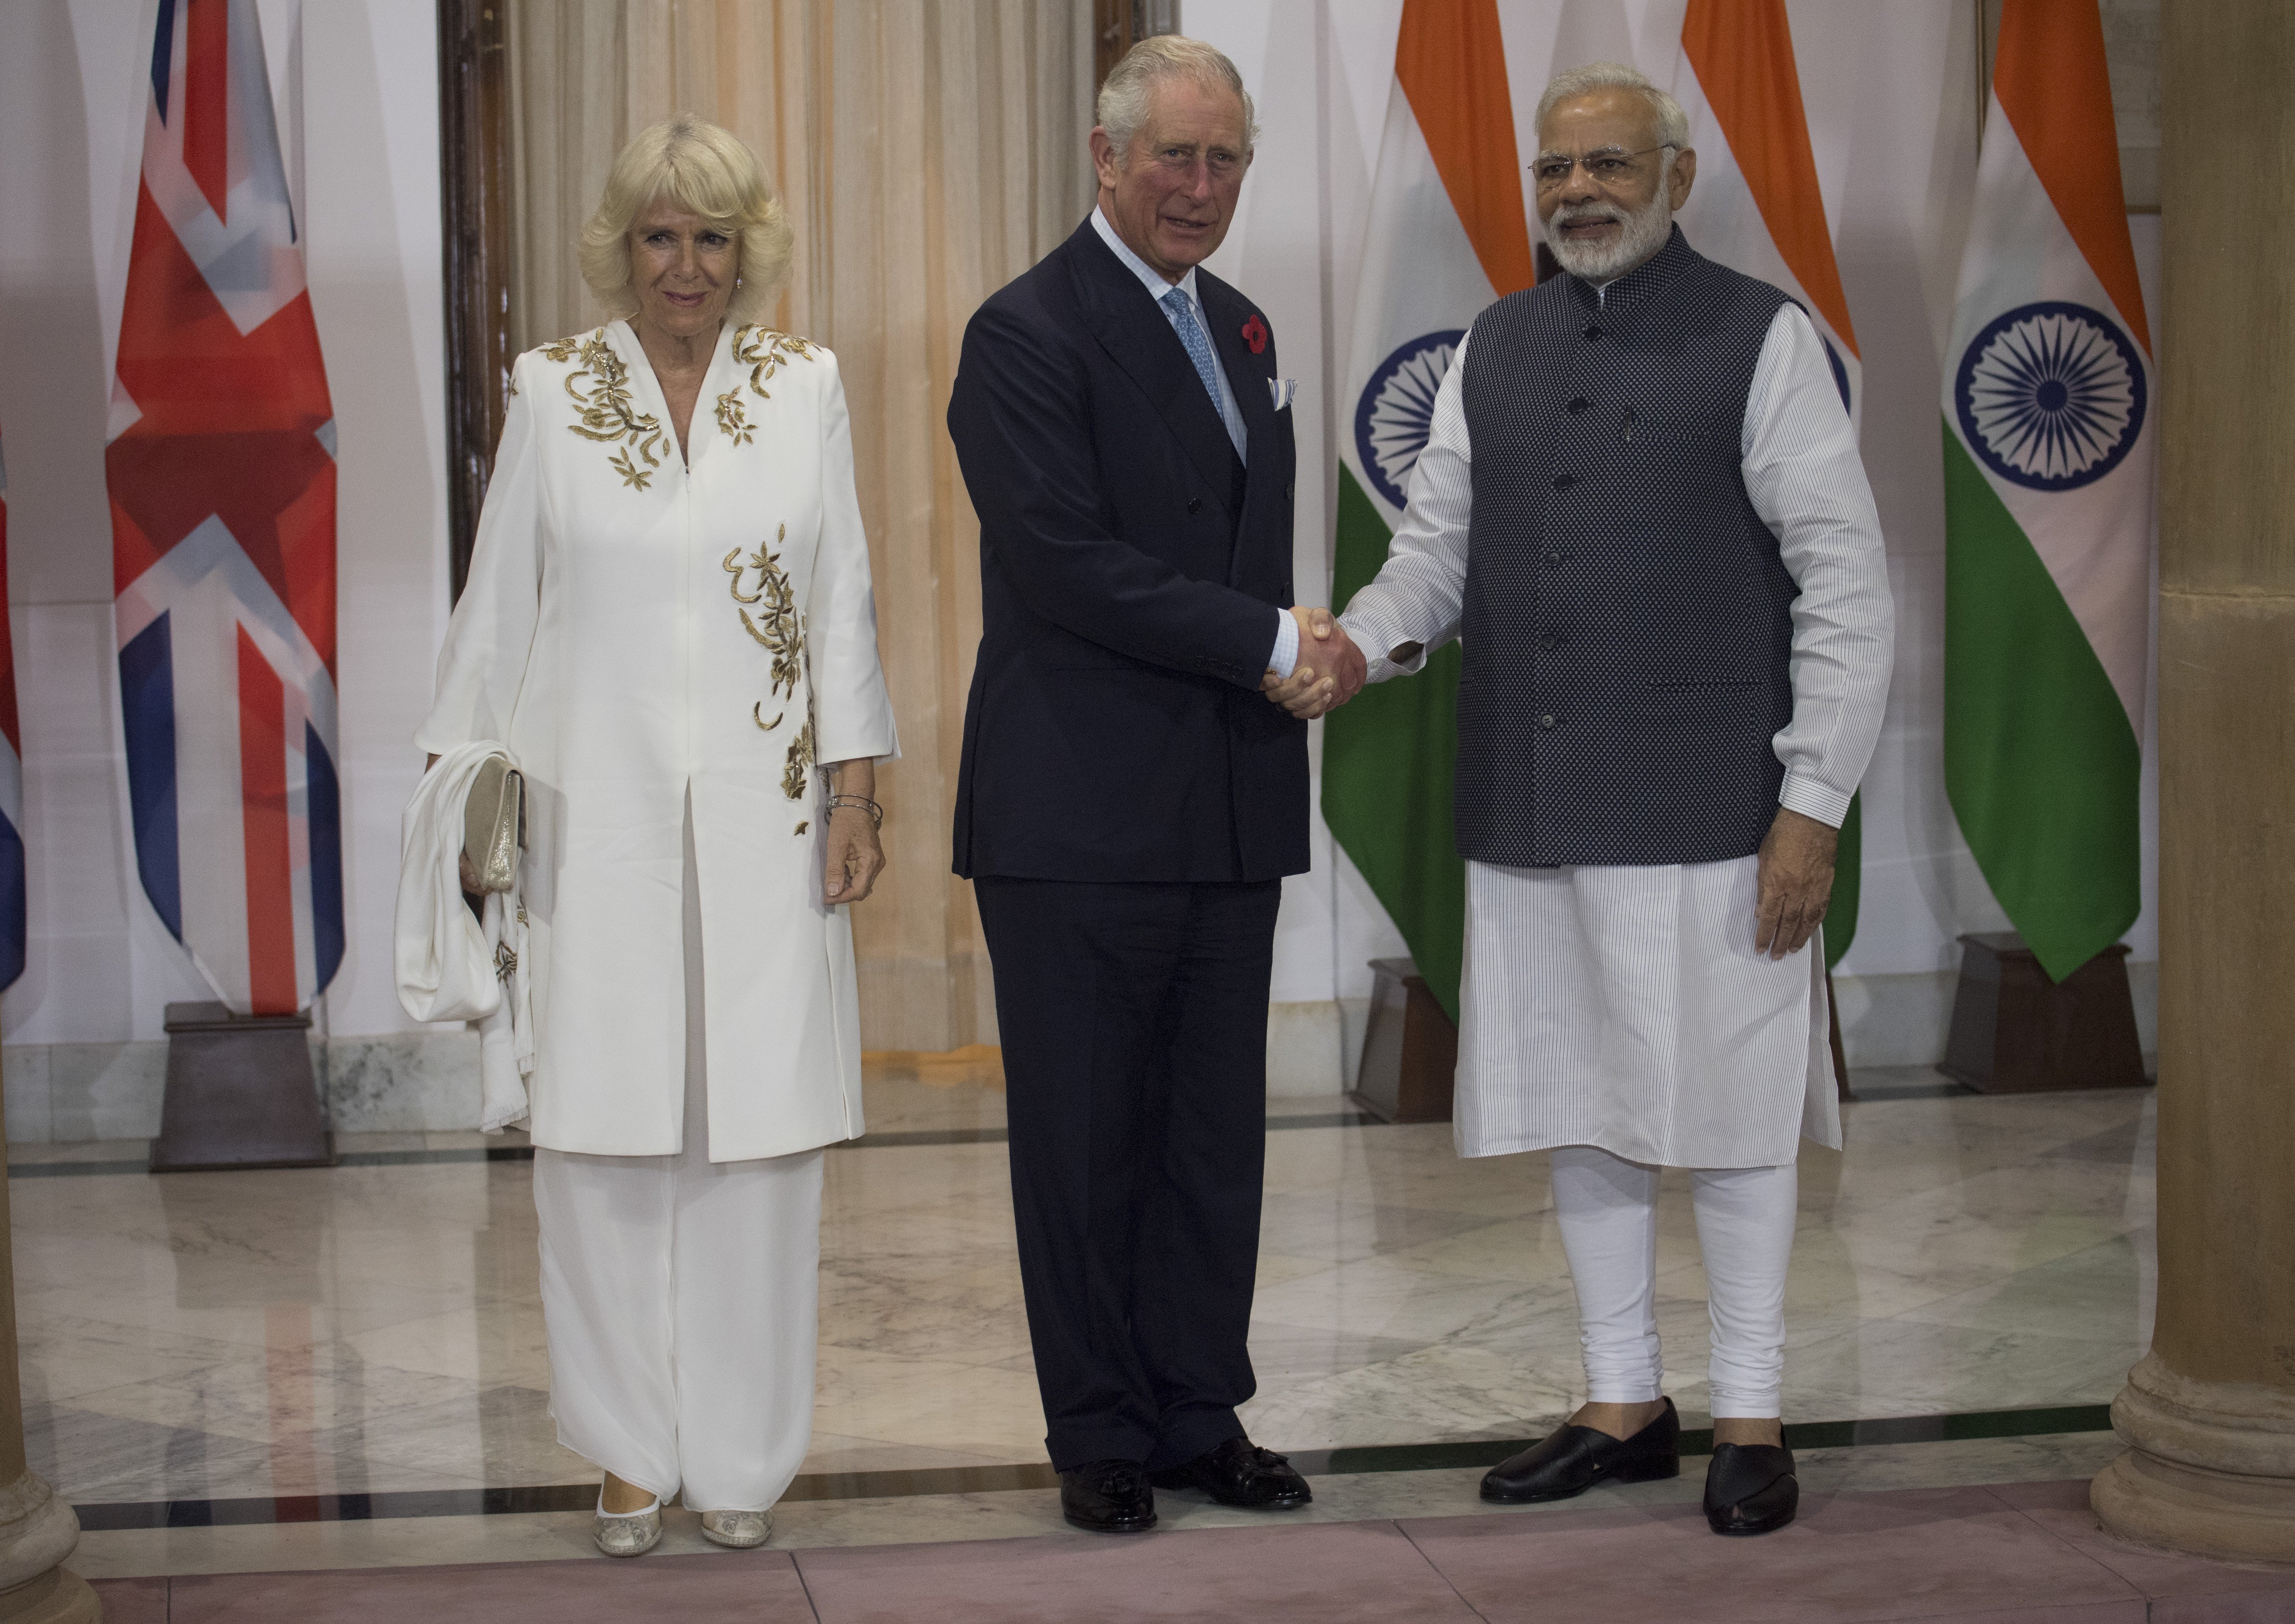 Prince Charles and Camilla are greeted by Mr Narendra Modi, Prime Minister of India at Hyderabad House  on November 9, 2017 in New Delhi, India. | Source: Getty Images.